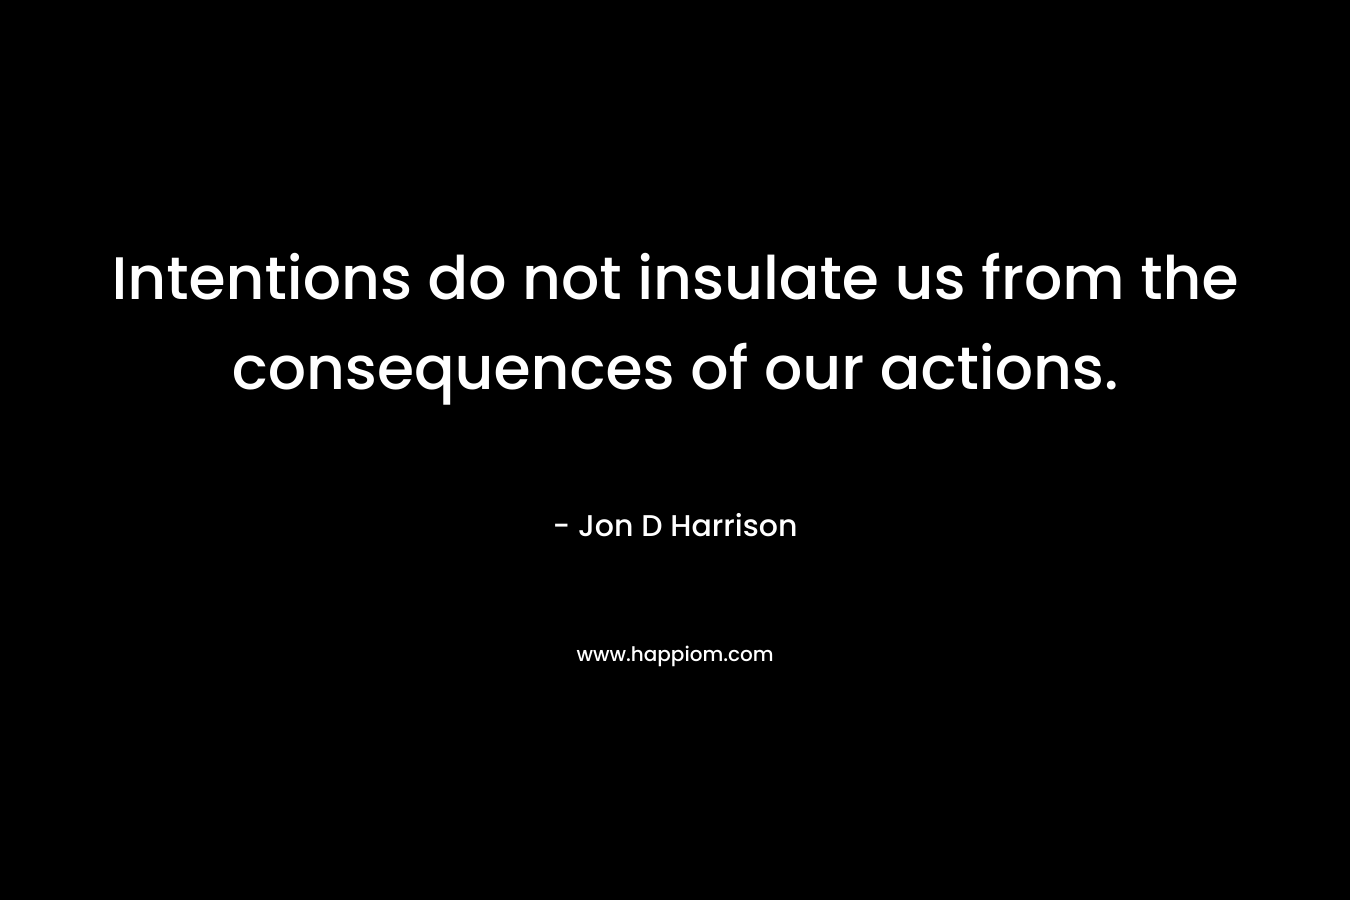 Intentions do not insulate us from the consequences of our actions.